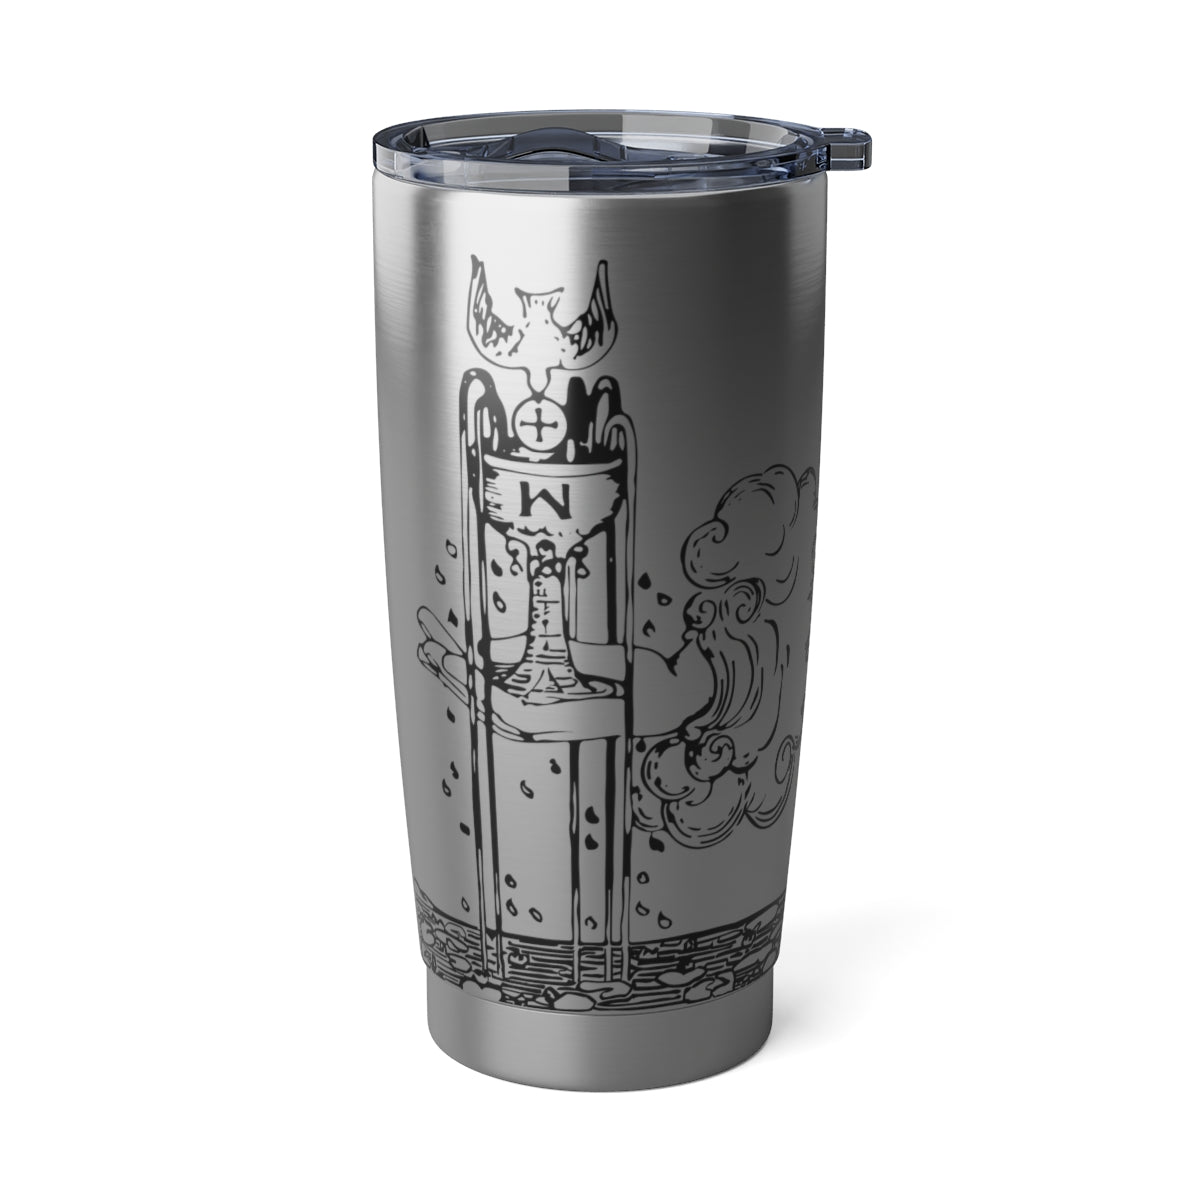 Tarot Tumbler - Ace of Cups - 20oz Stainless Steel Tumbler